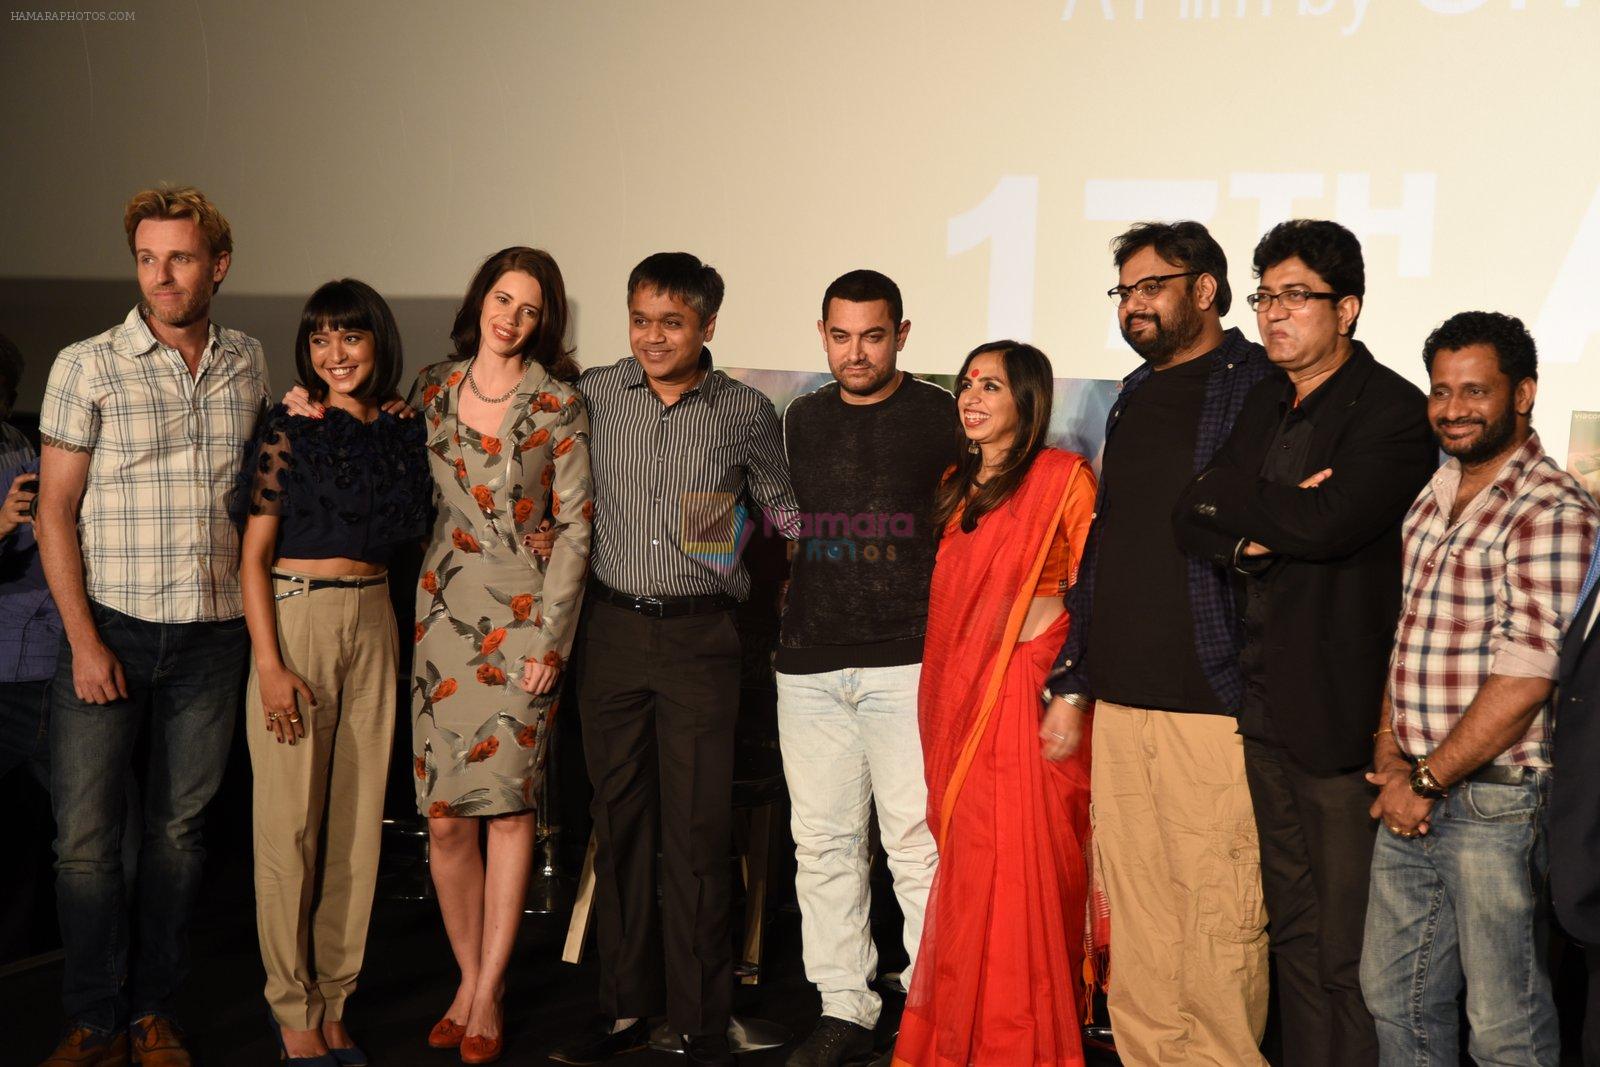 Aamir Khan, Kalki Koechlin, Parsoon Joshi, Resul Pookutty unveils Margarita with a straw First Look in Mumbai on 4th March 2015